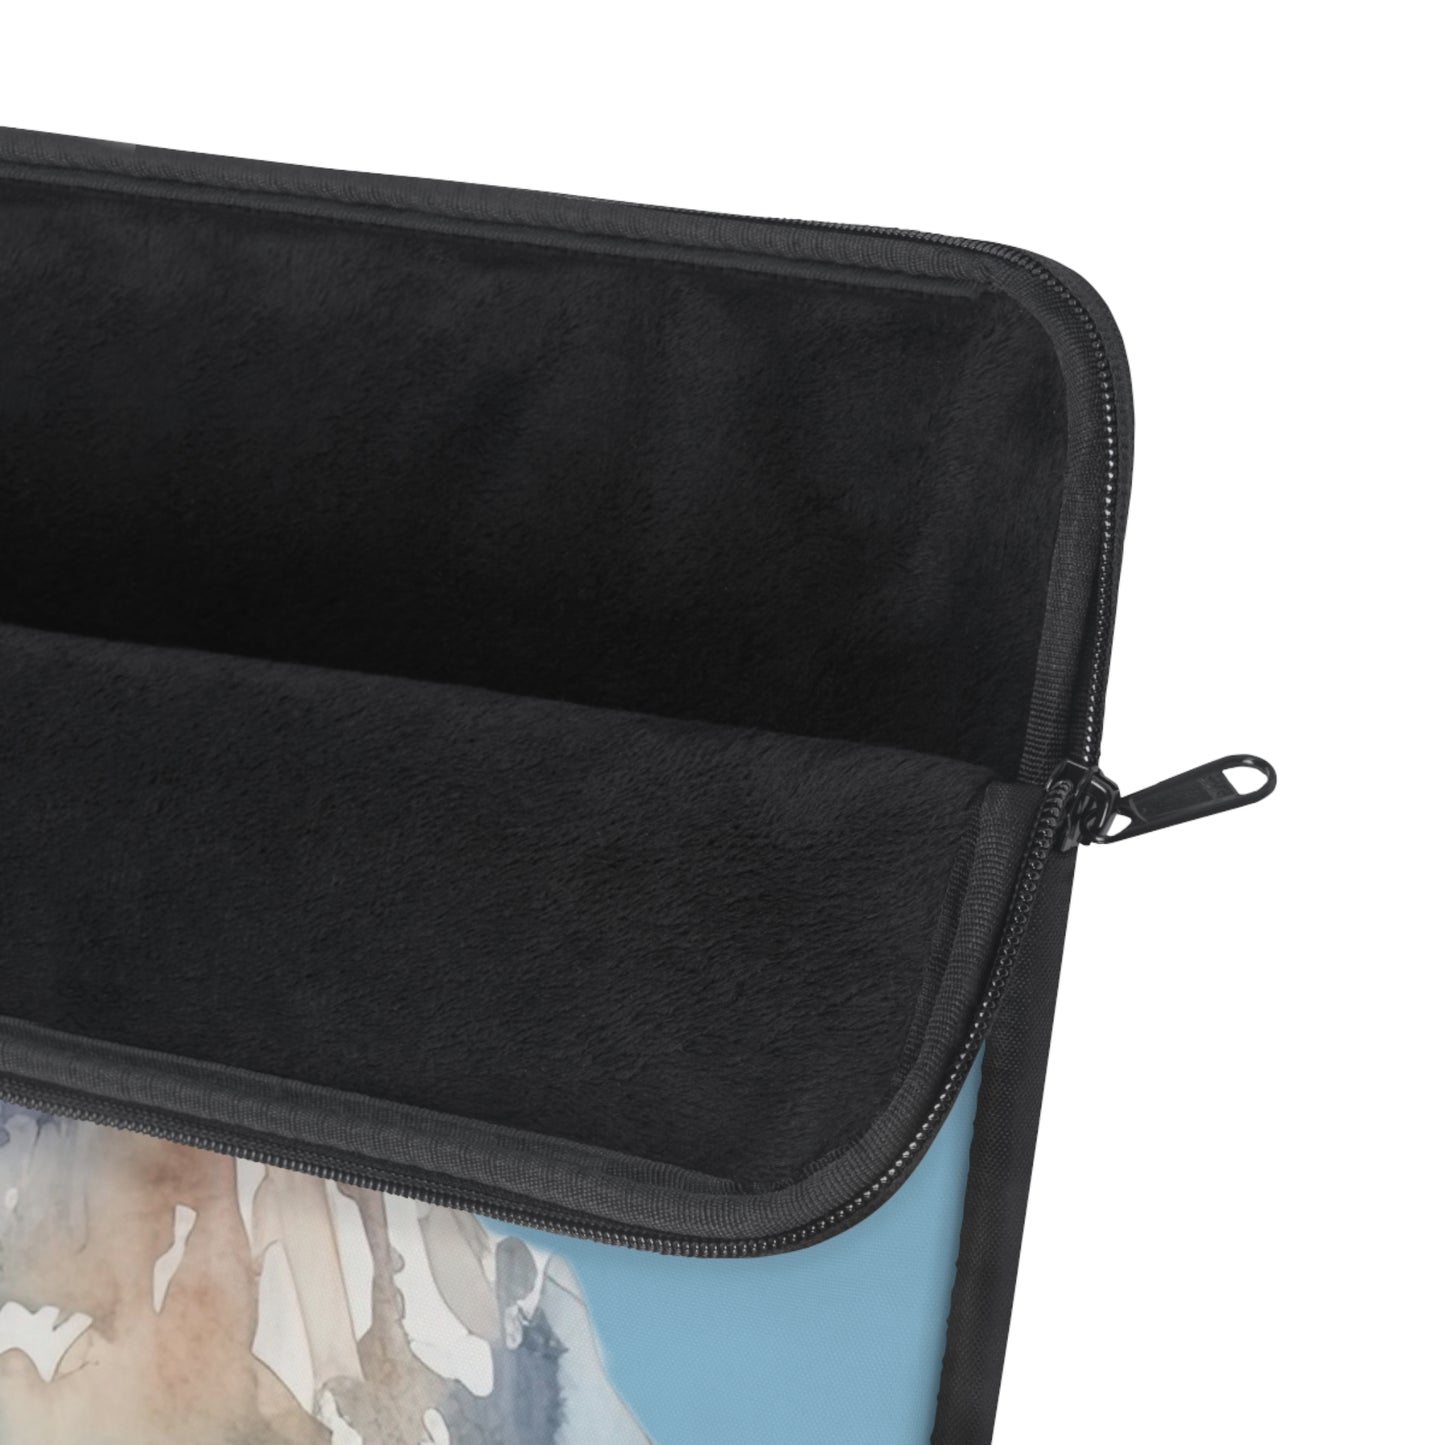 Laptop Sleeve - The Rock that is Higher than I